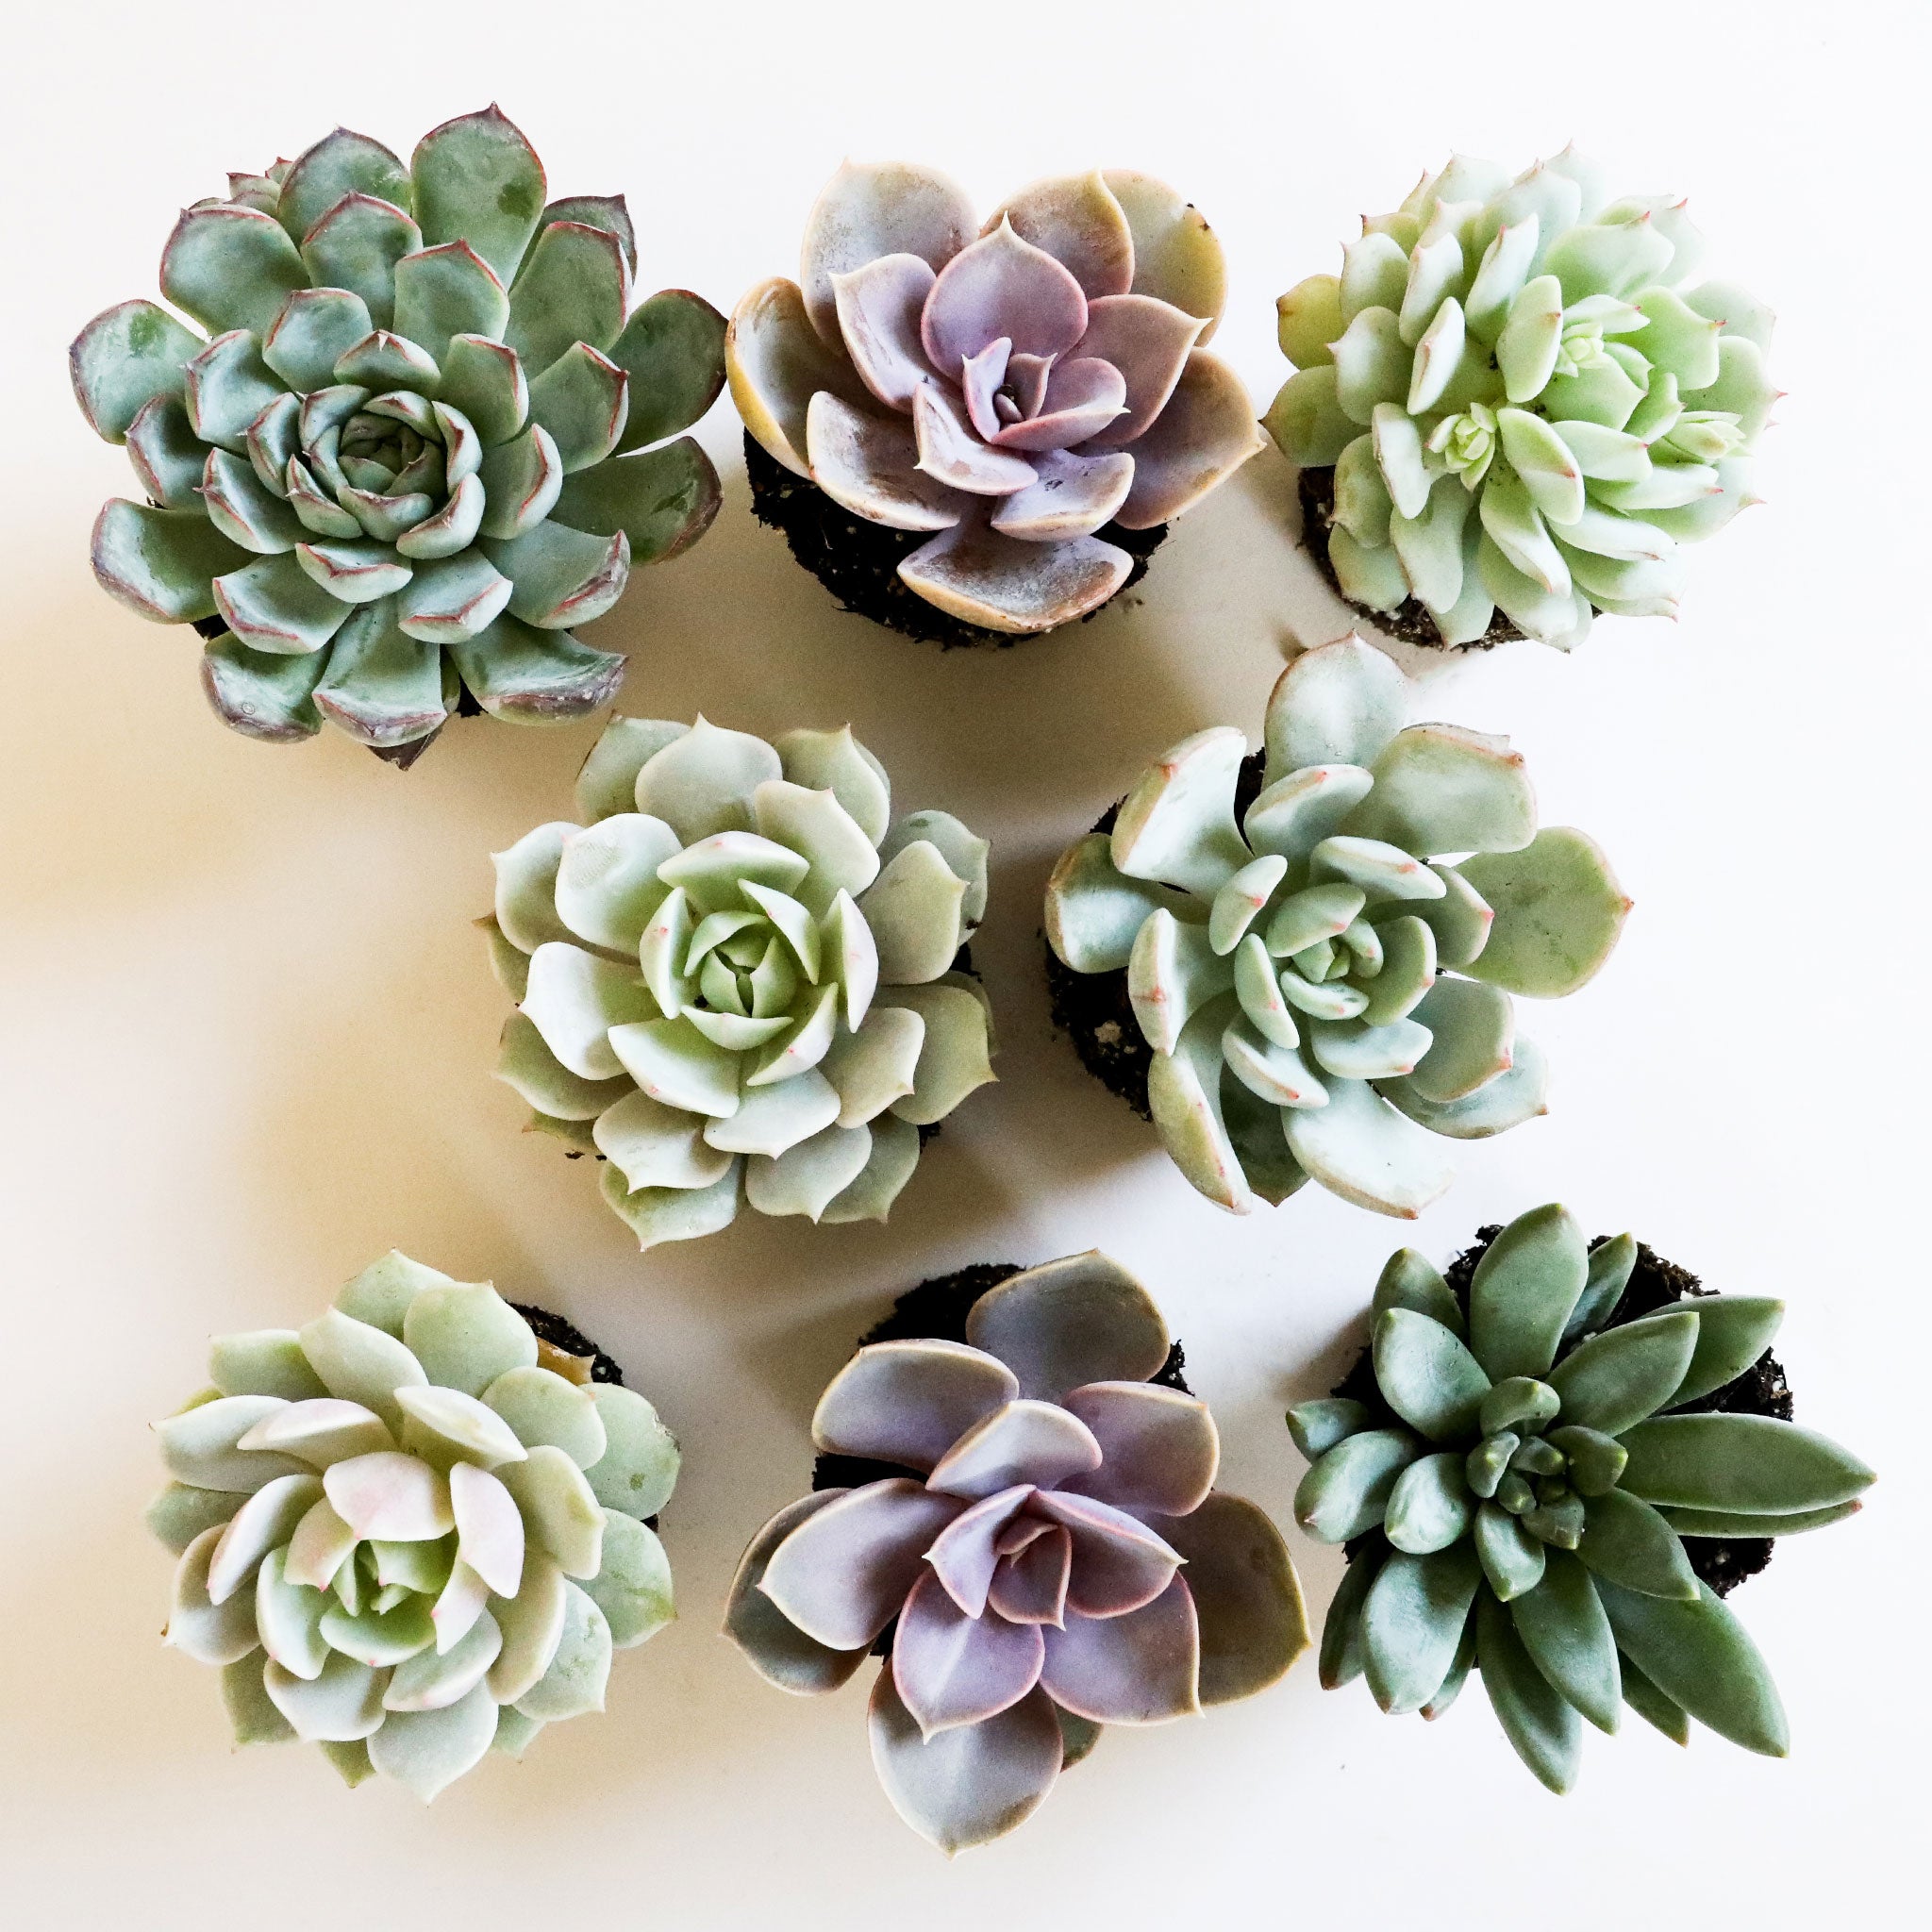 Birds eye view of a white background with eight different succulents. The succulents are cool tones of different shades of green and light lavender.